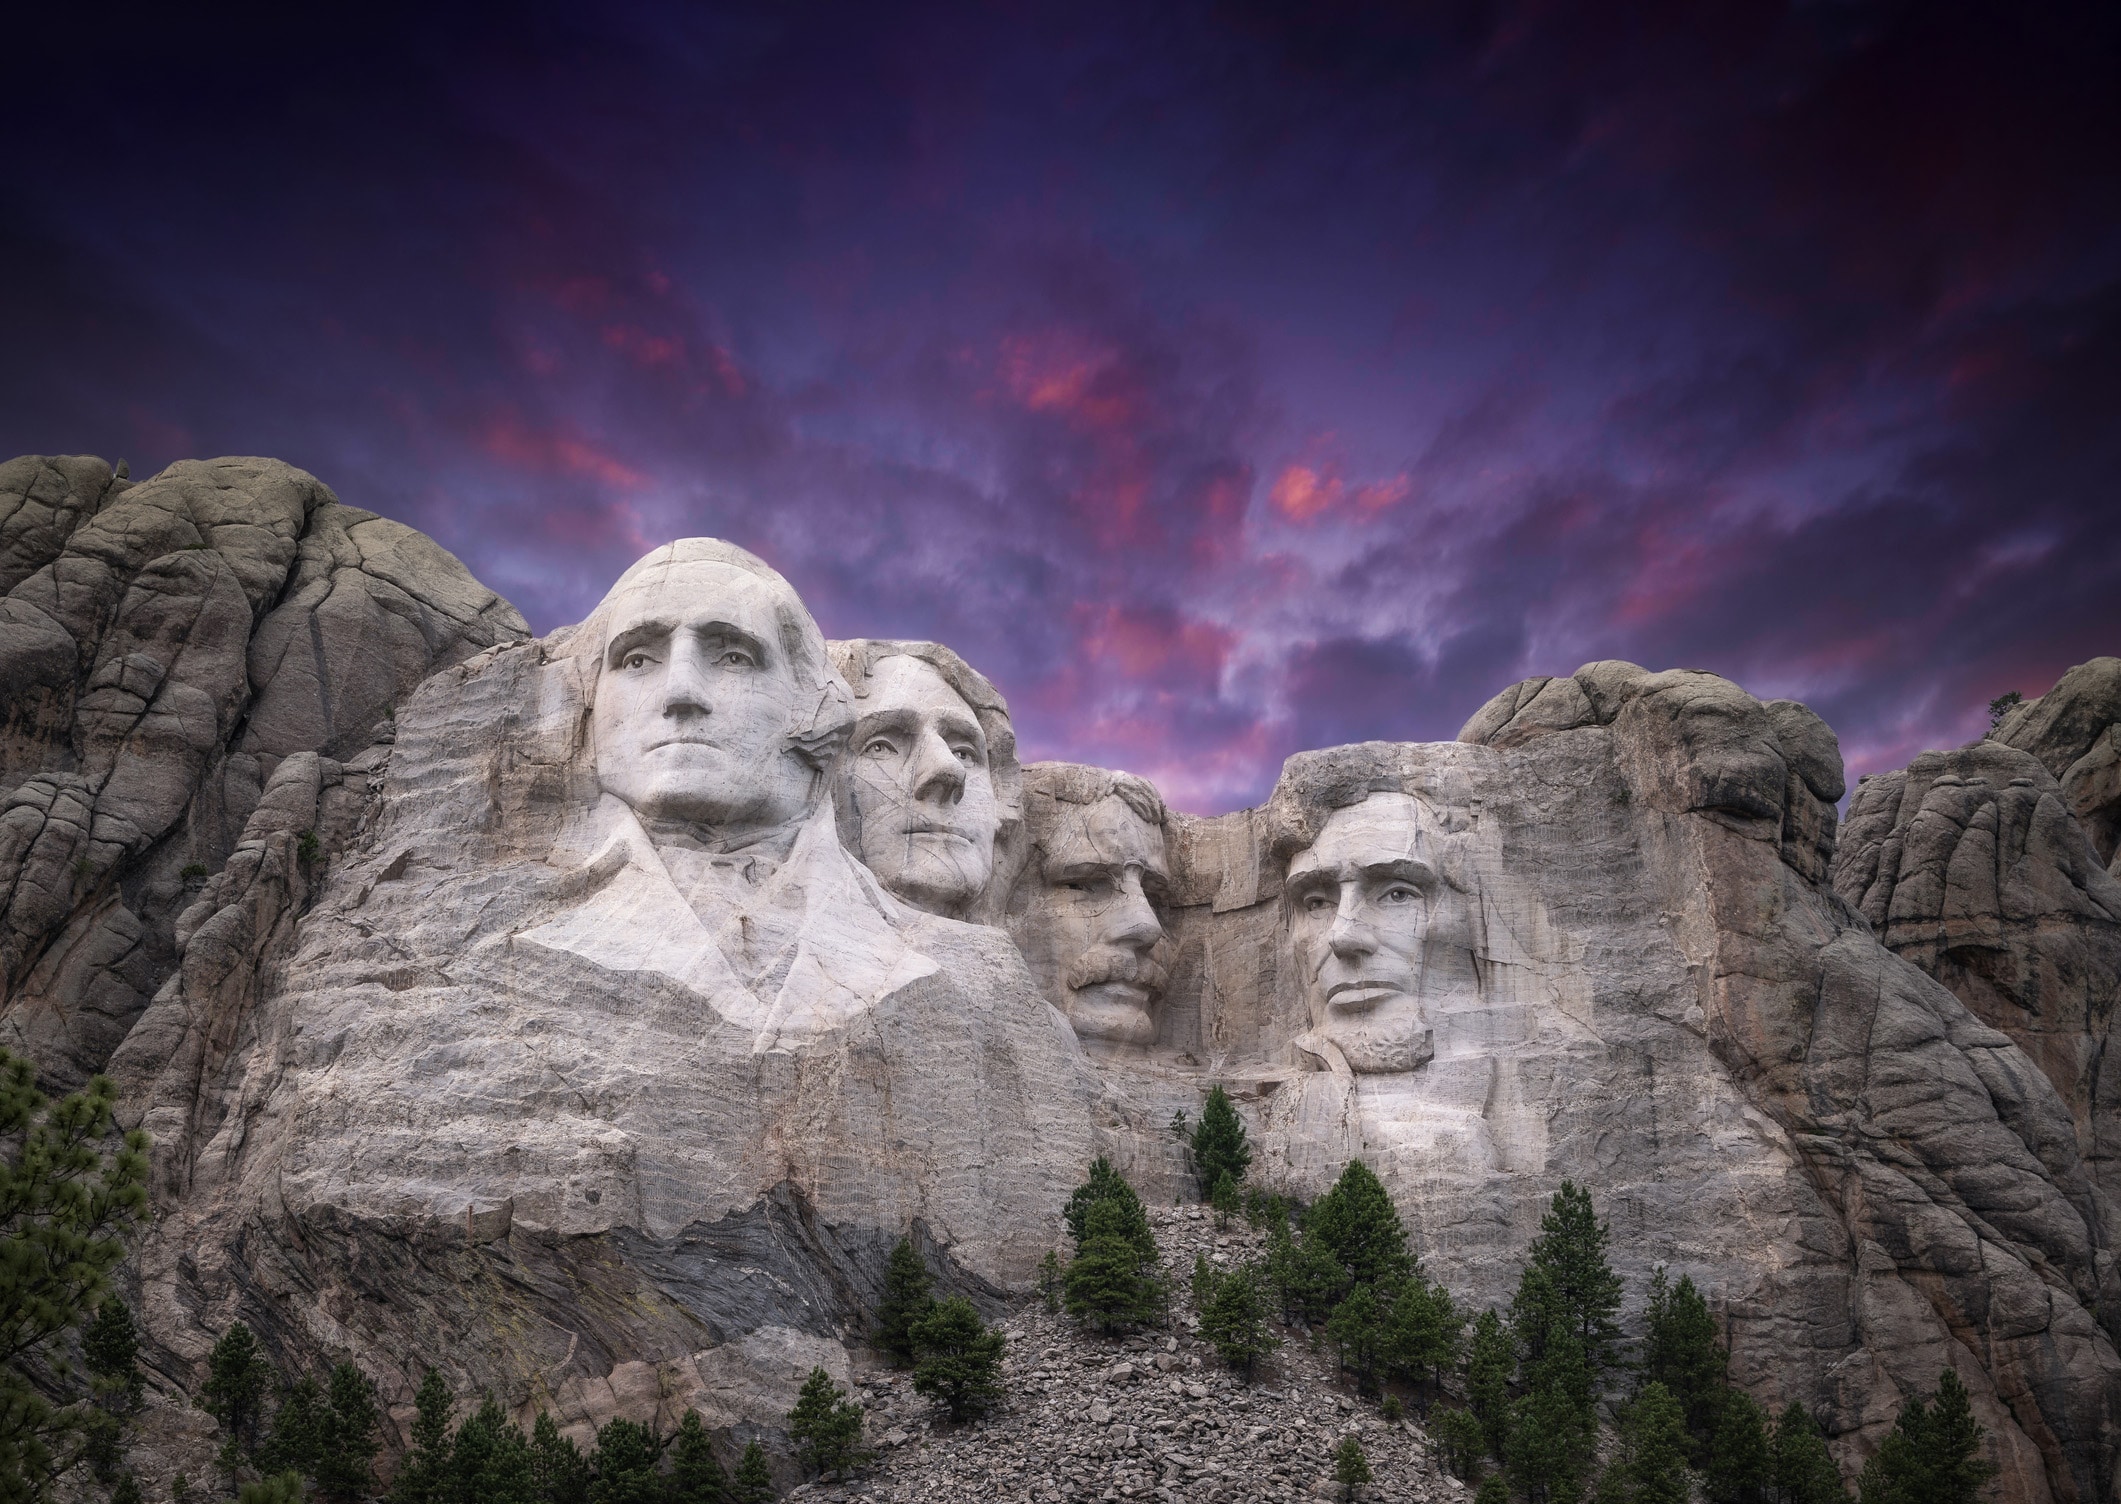 Four presidents carved into a cliff face.